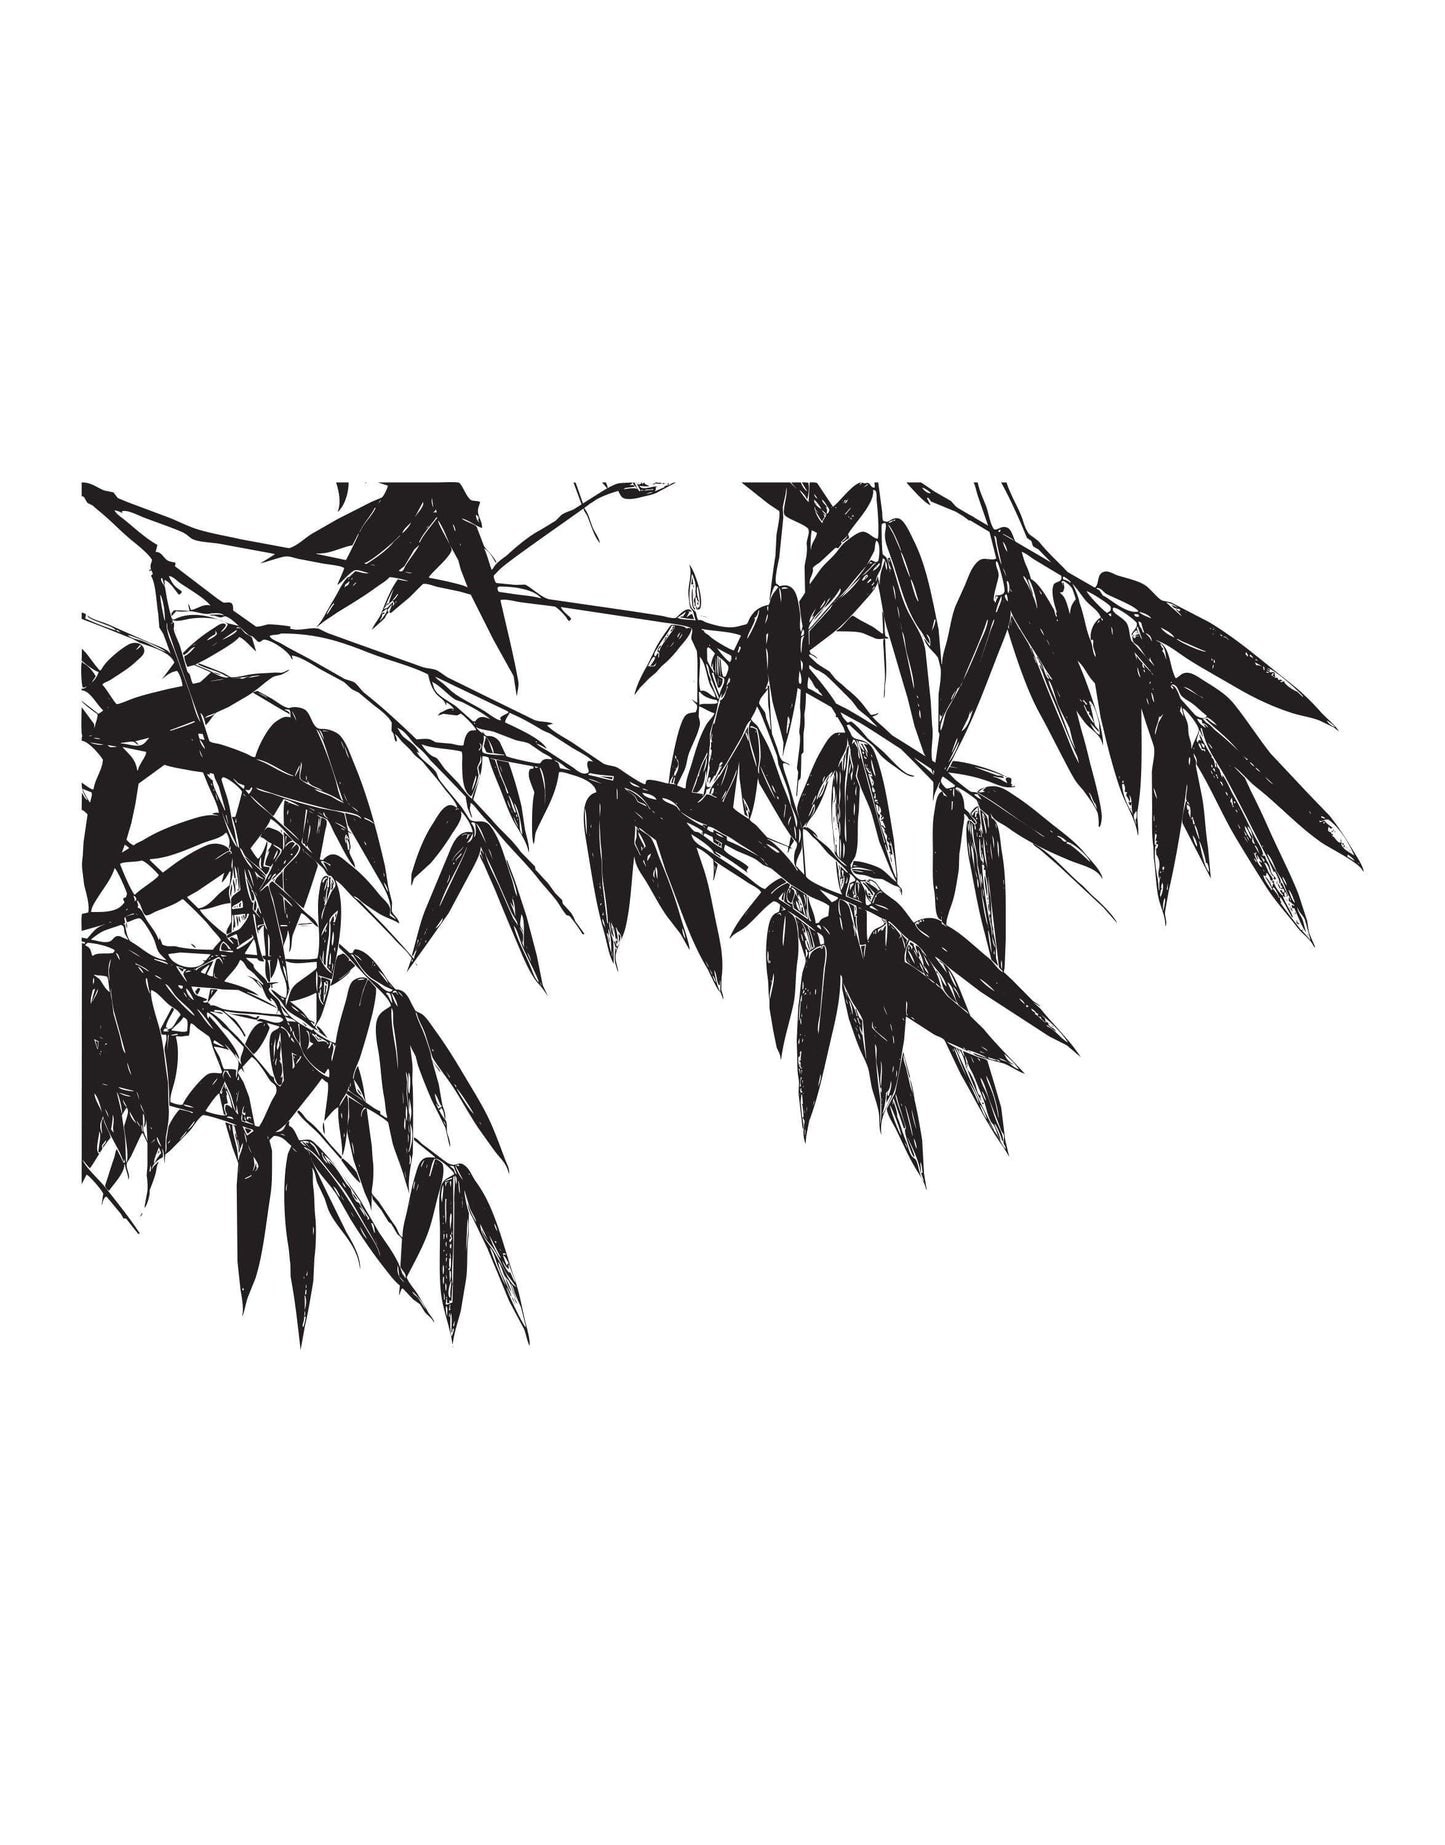 Chinese Bamboo Foliage Leaves Vinyl Wall Decal. #6313